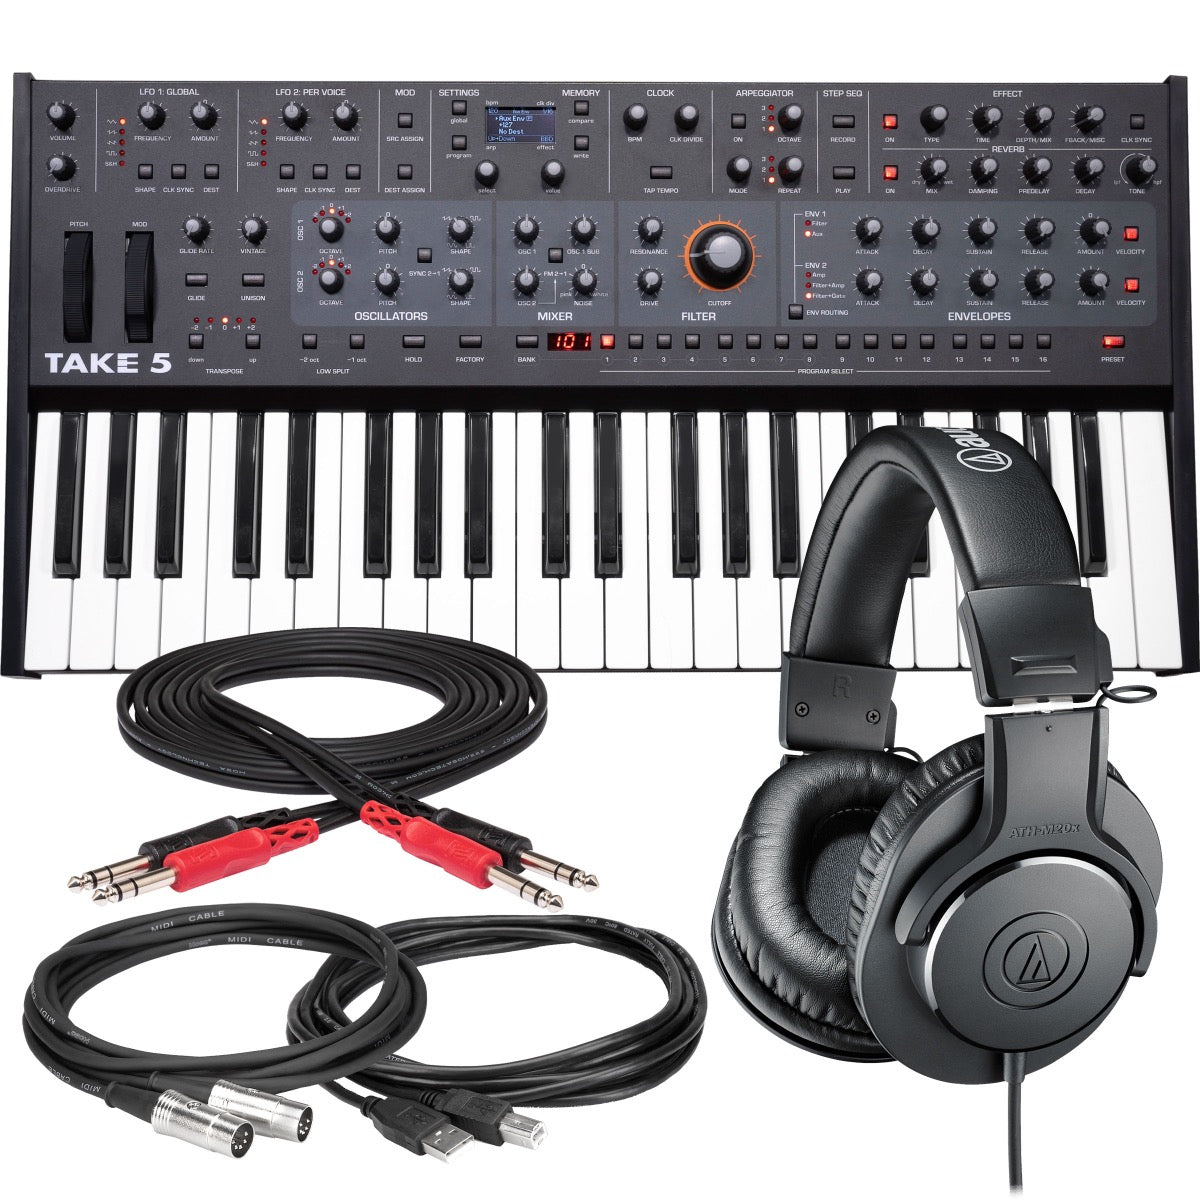 Bundle collage showing components in Sequential Take 5 Compact 5-Voice Polyphonic Synthesizer STUDIO KIT bundle